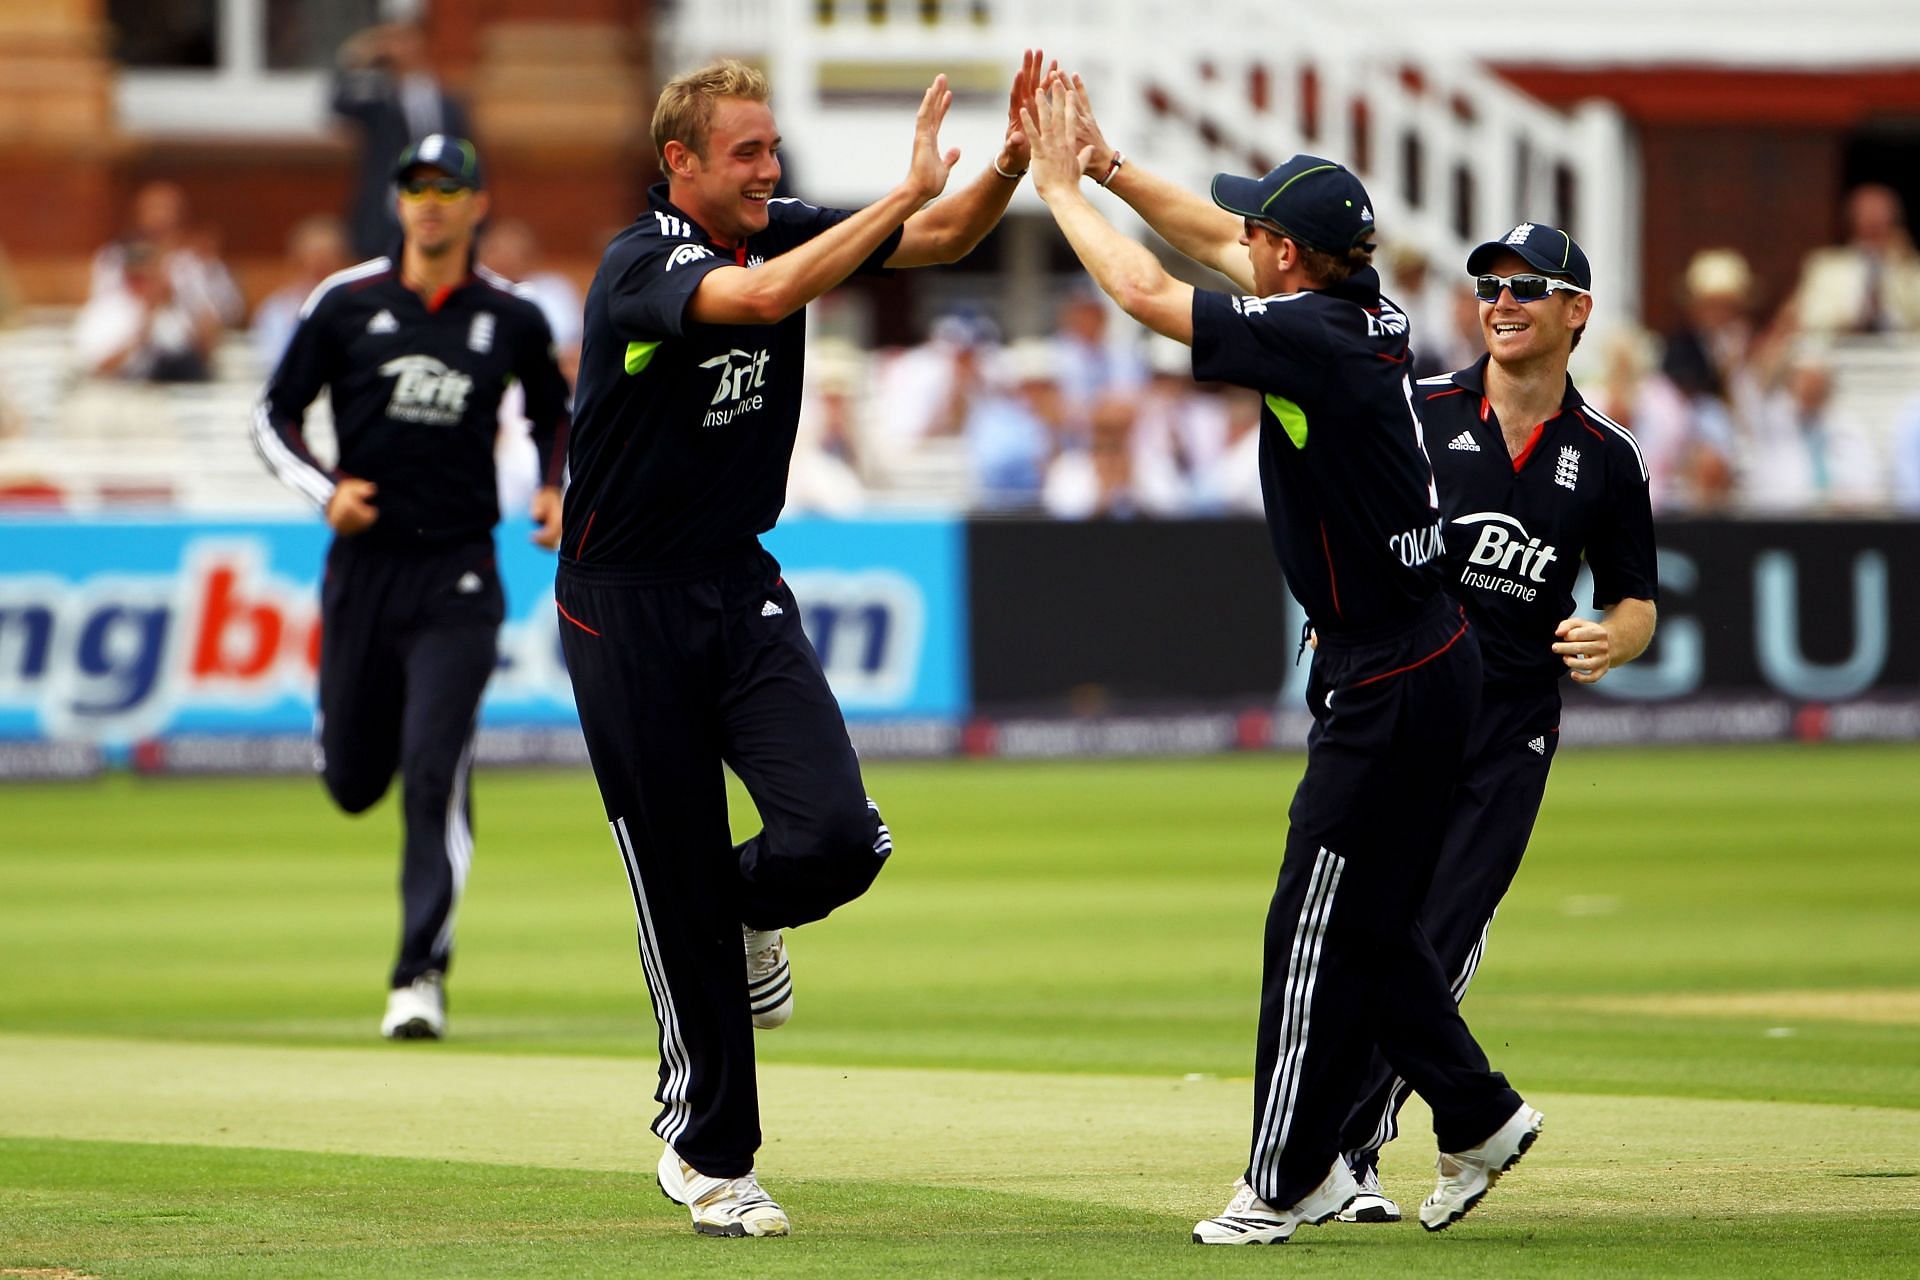 Broad has featured in 121 ODIs for England